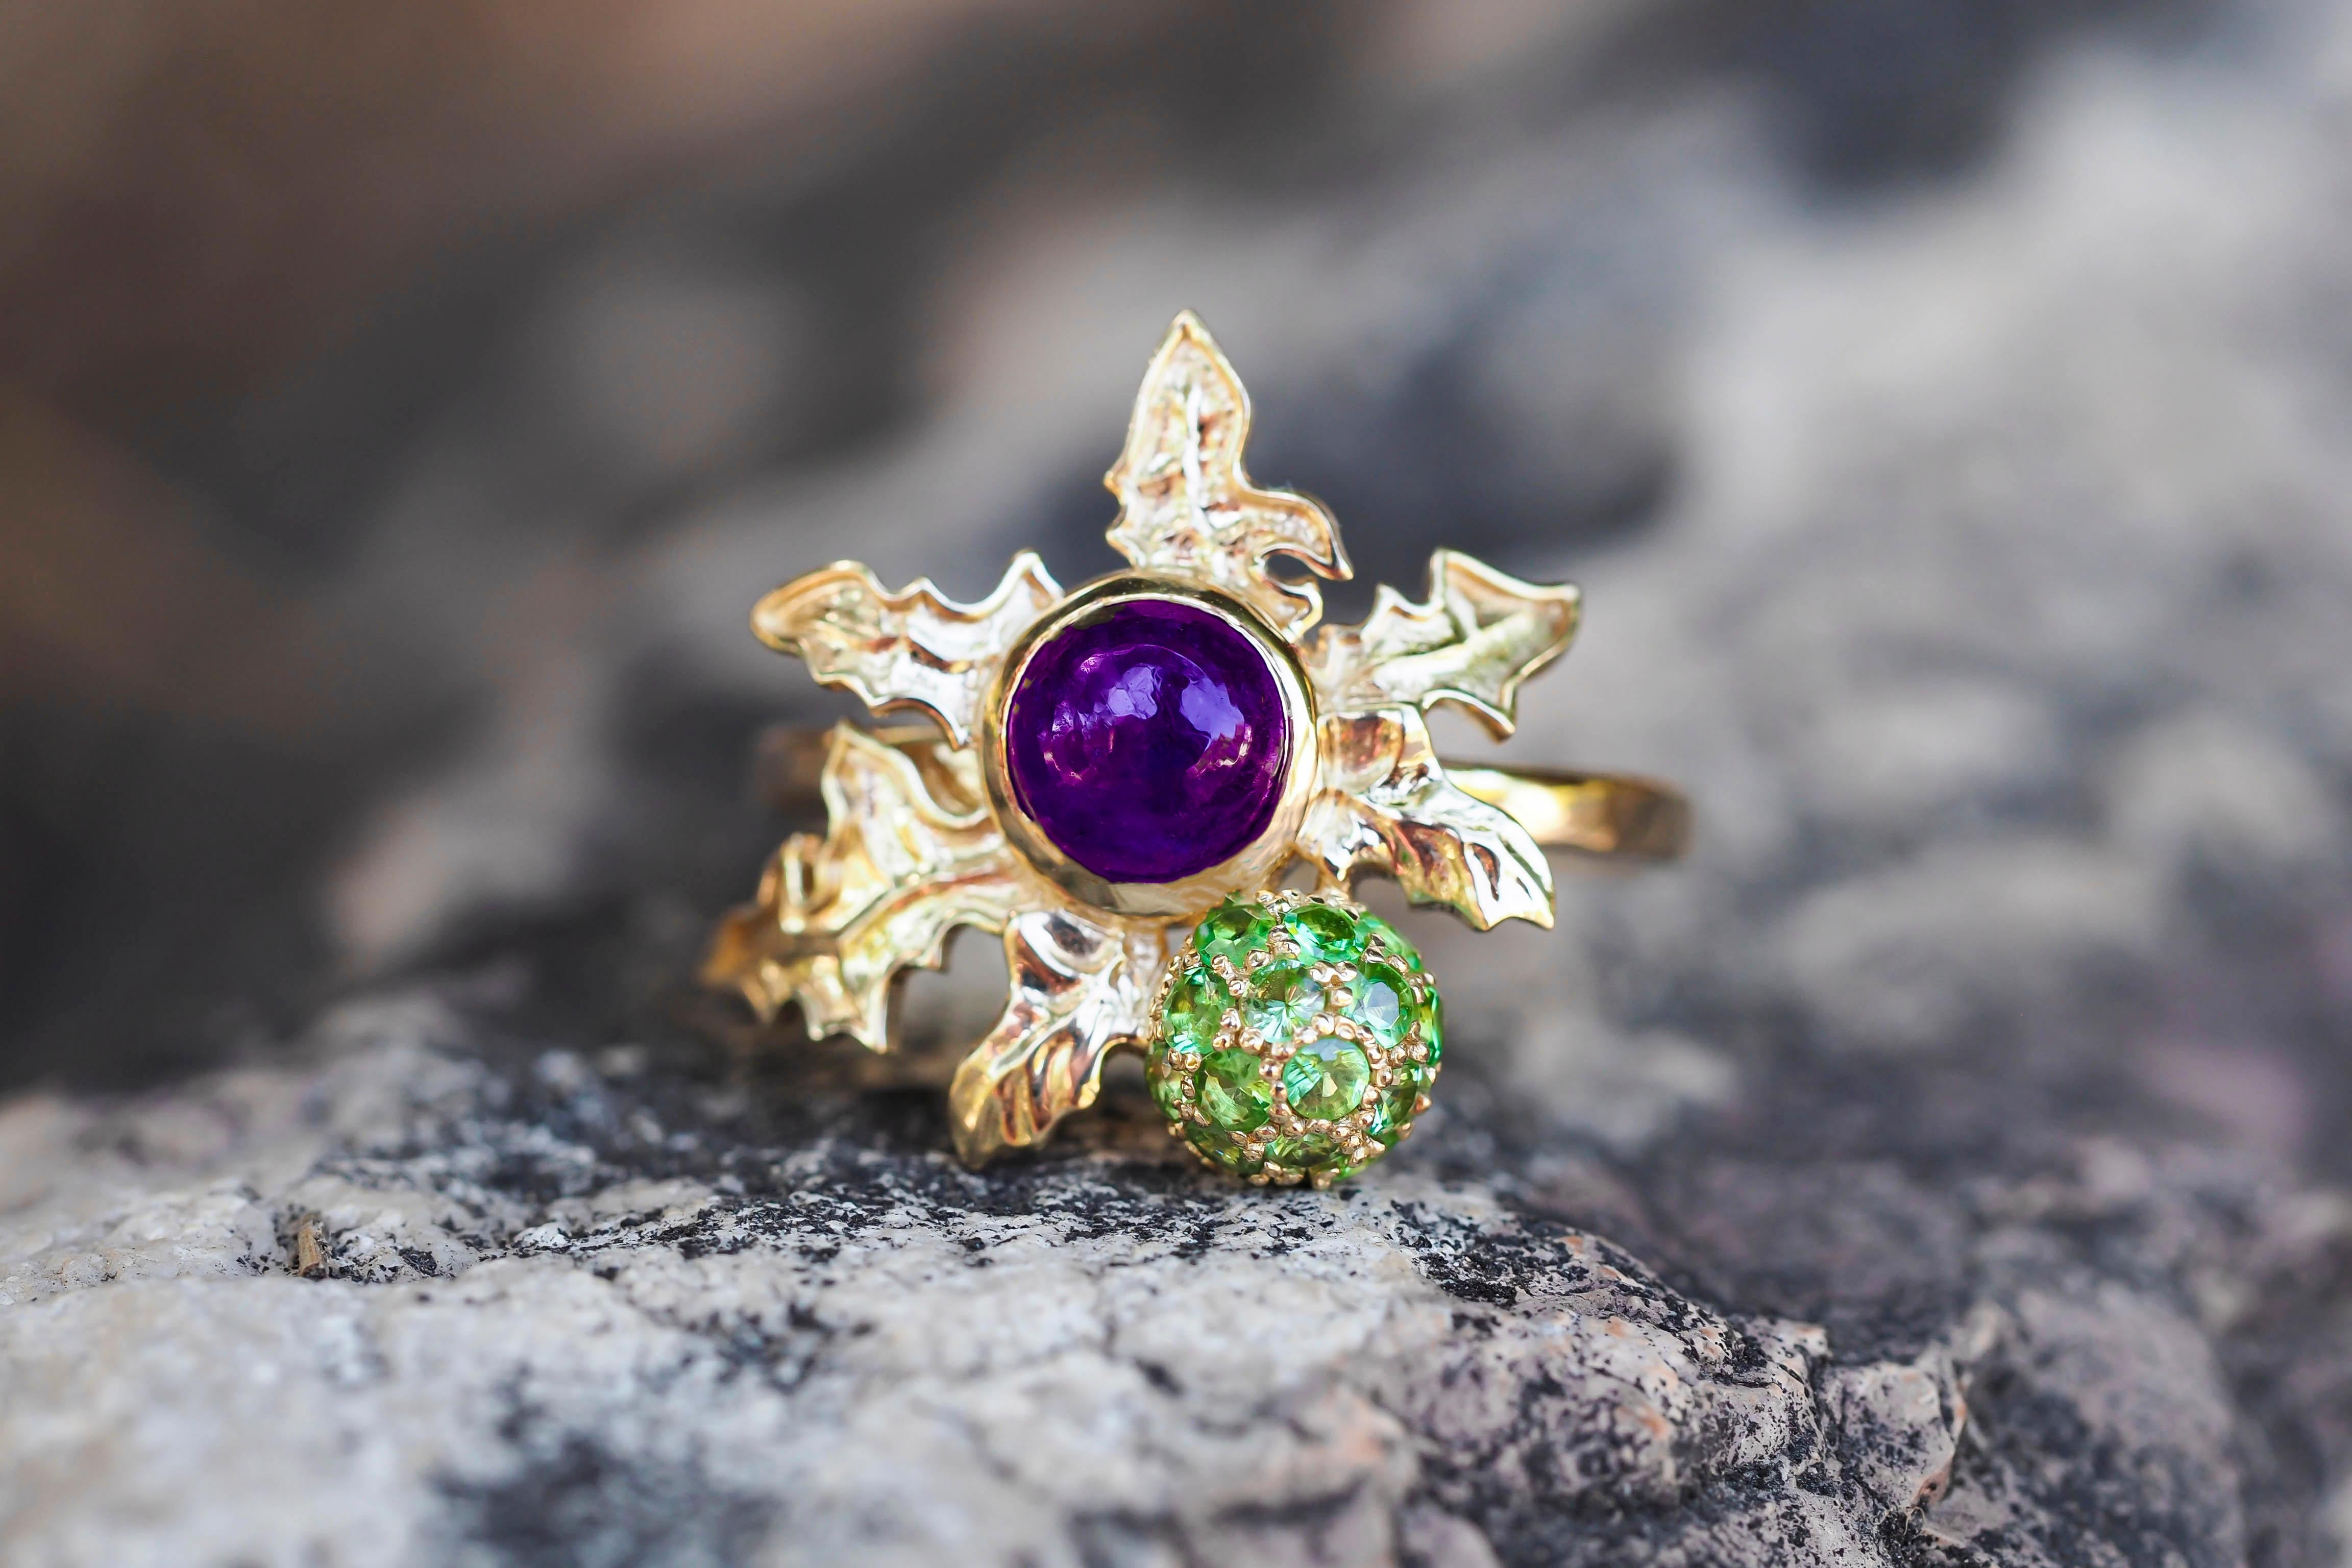 14 kt  gold ring with amethyst and peridots. Scottish thistle gold ring.
Weight: approx. 2.85 g. 
Set with amethyst, color - purple
cabochon cut, 1,2 ct. in total, 6 mm
Clarity: Transparent with inclusions  
Surrounding stones: peridots, round cut,